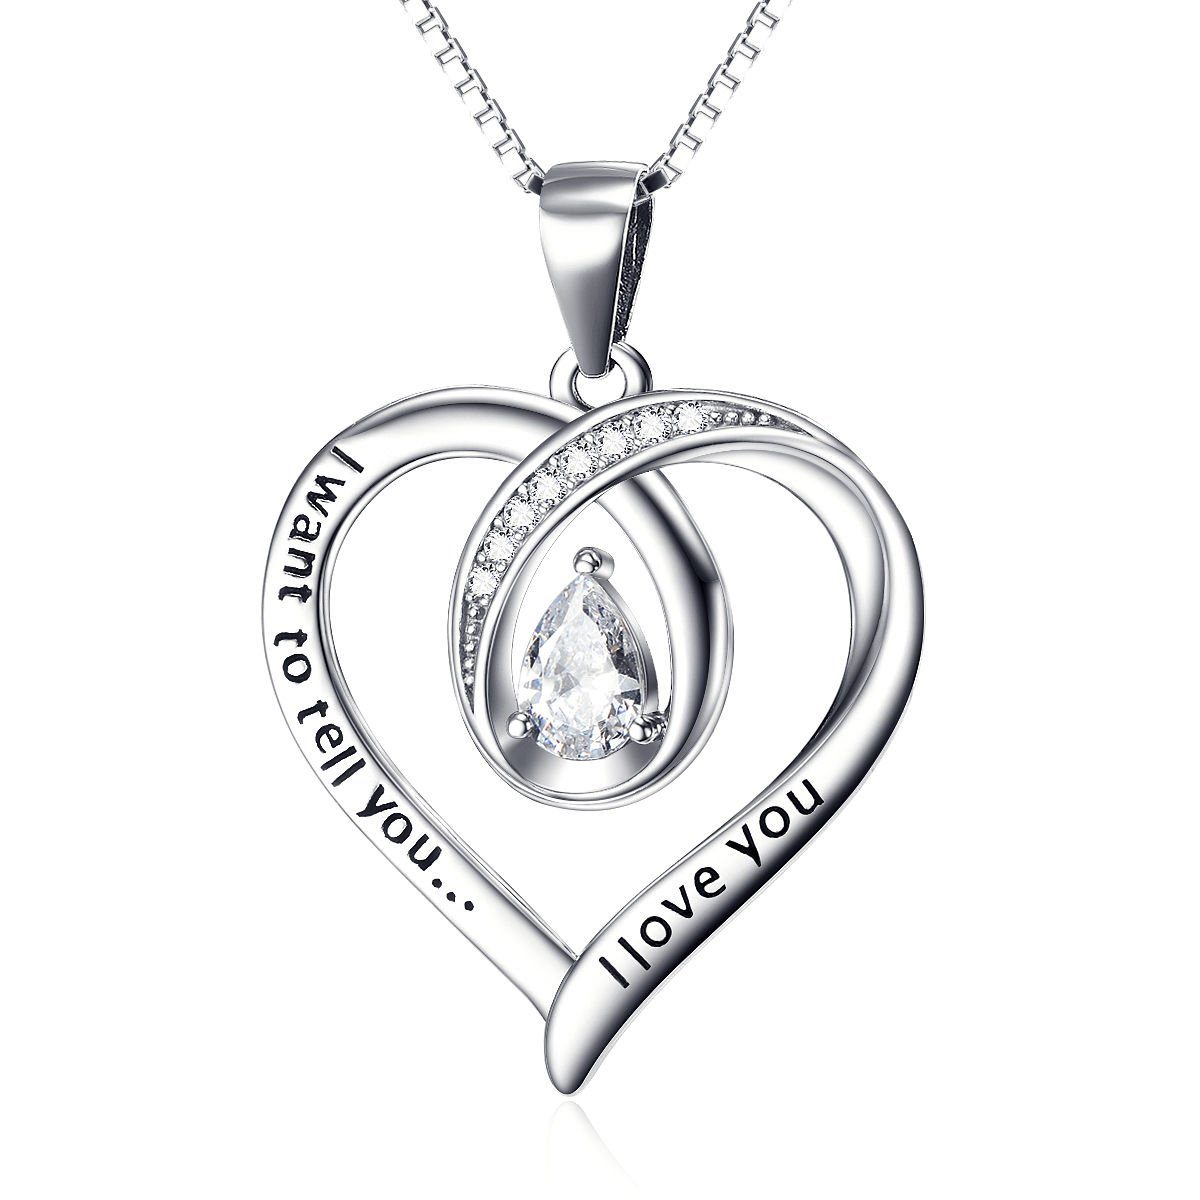 Herz mit 925 Sterling I "I You", Anhänger Love to you... want Kette Schmuck-Elfe tell Silber